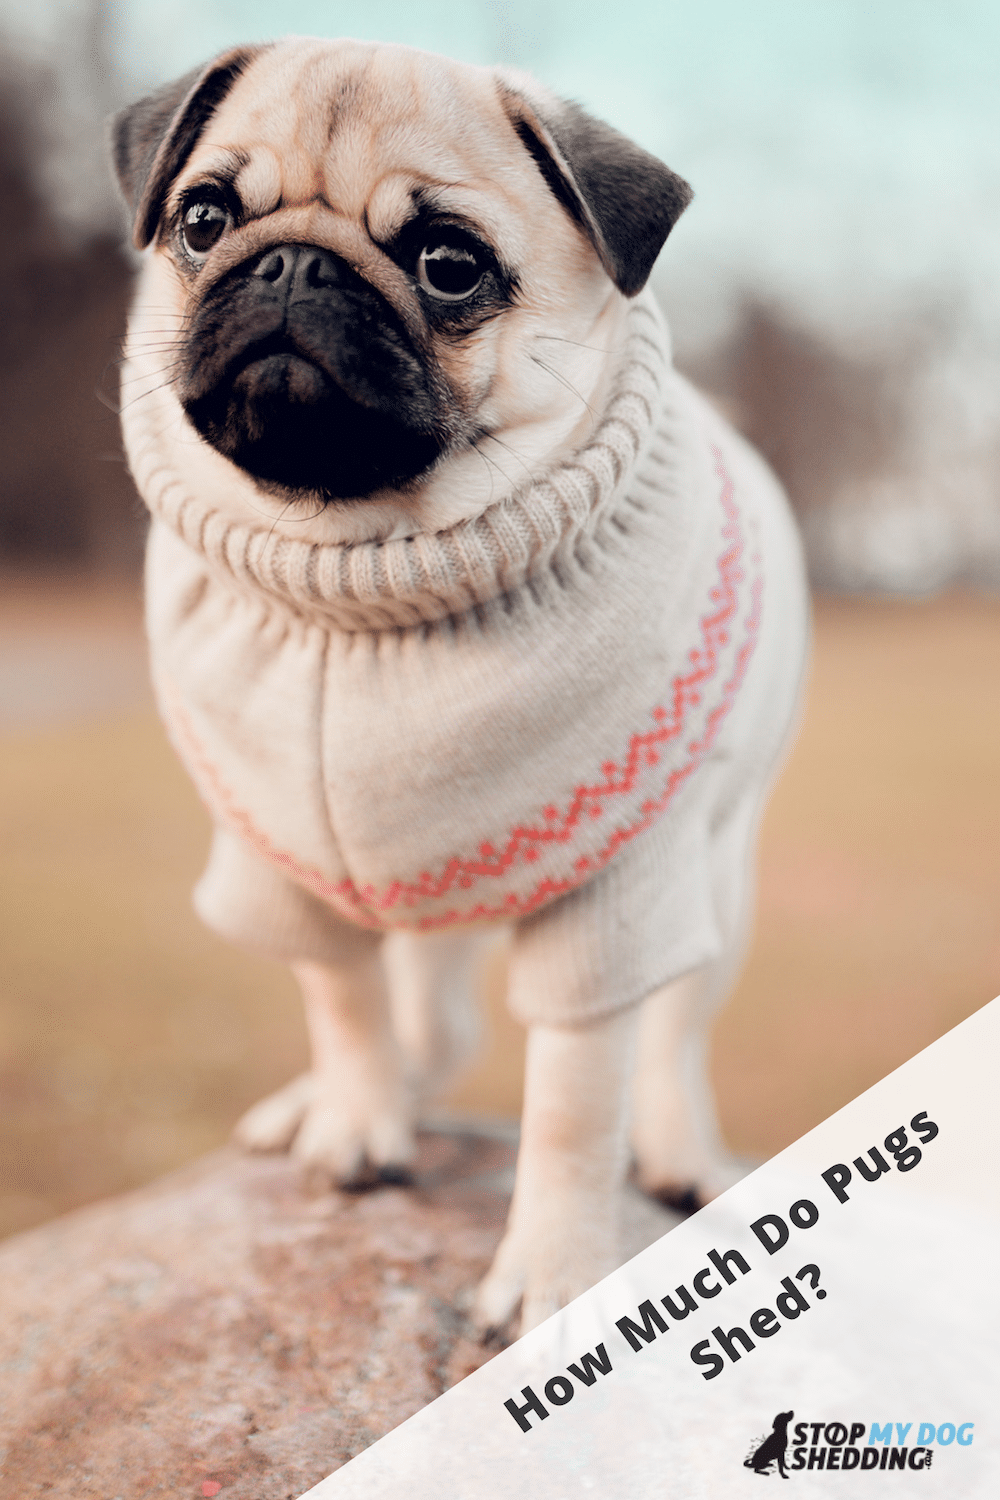 Do Pugs Shed Much? (Helpful Guide to Pug Shedding)